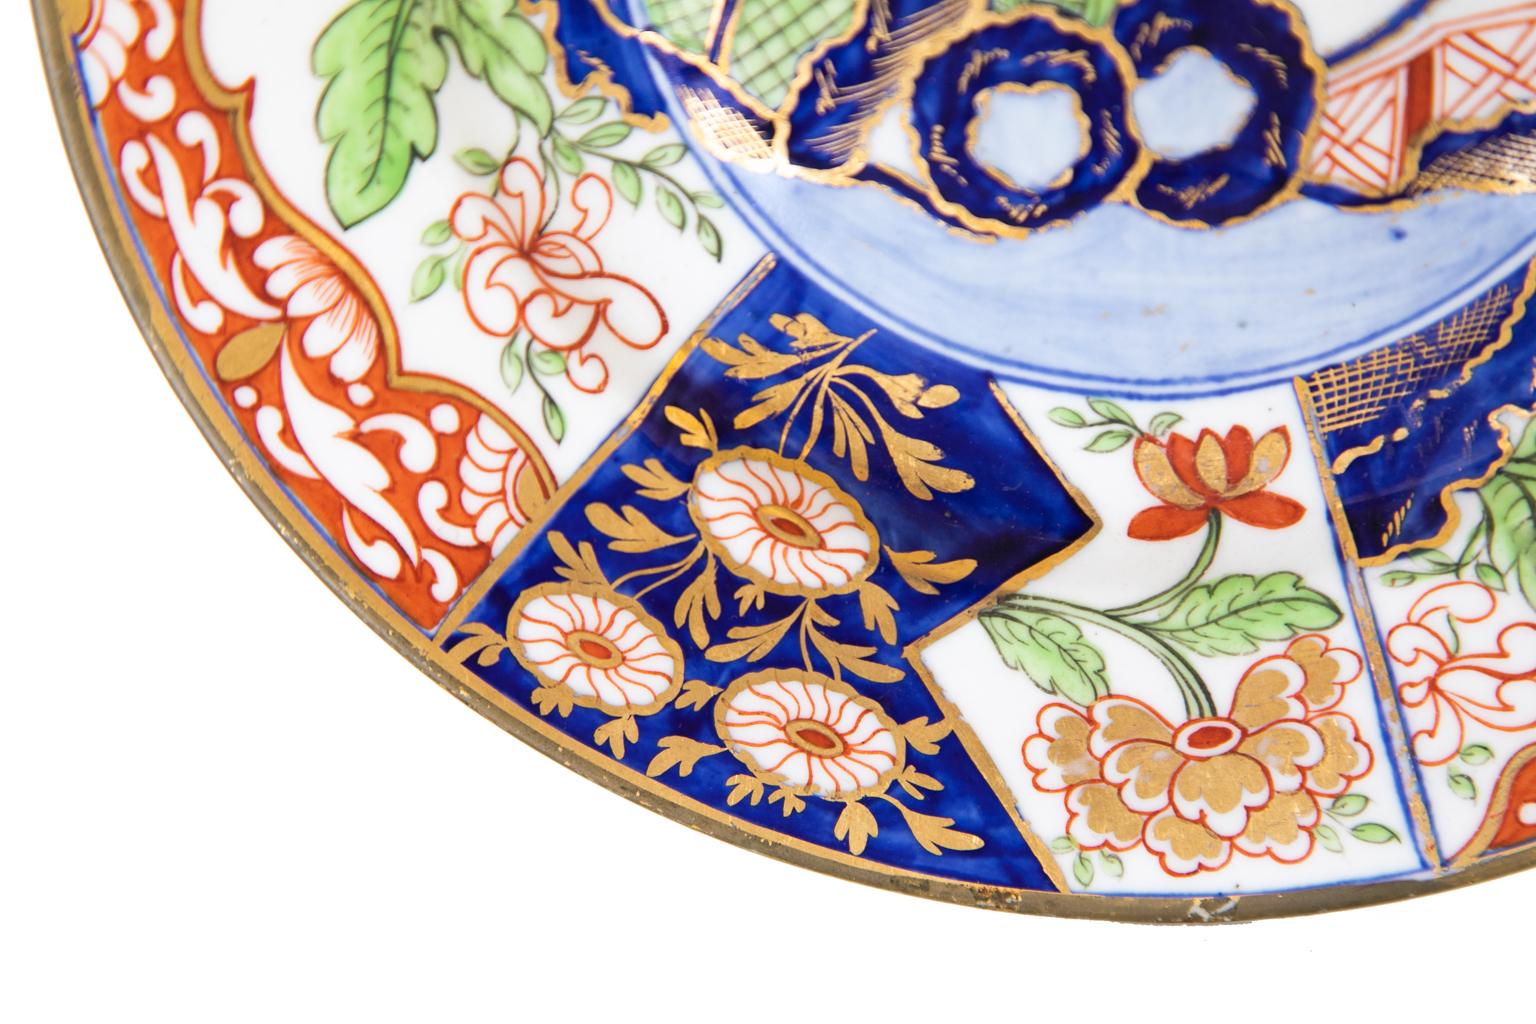 English derby plate, with an over glaze crown mark and is decorated with brilliant cobalt, red, and green floral patterns. There are bold gilt highlights.